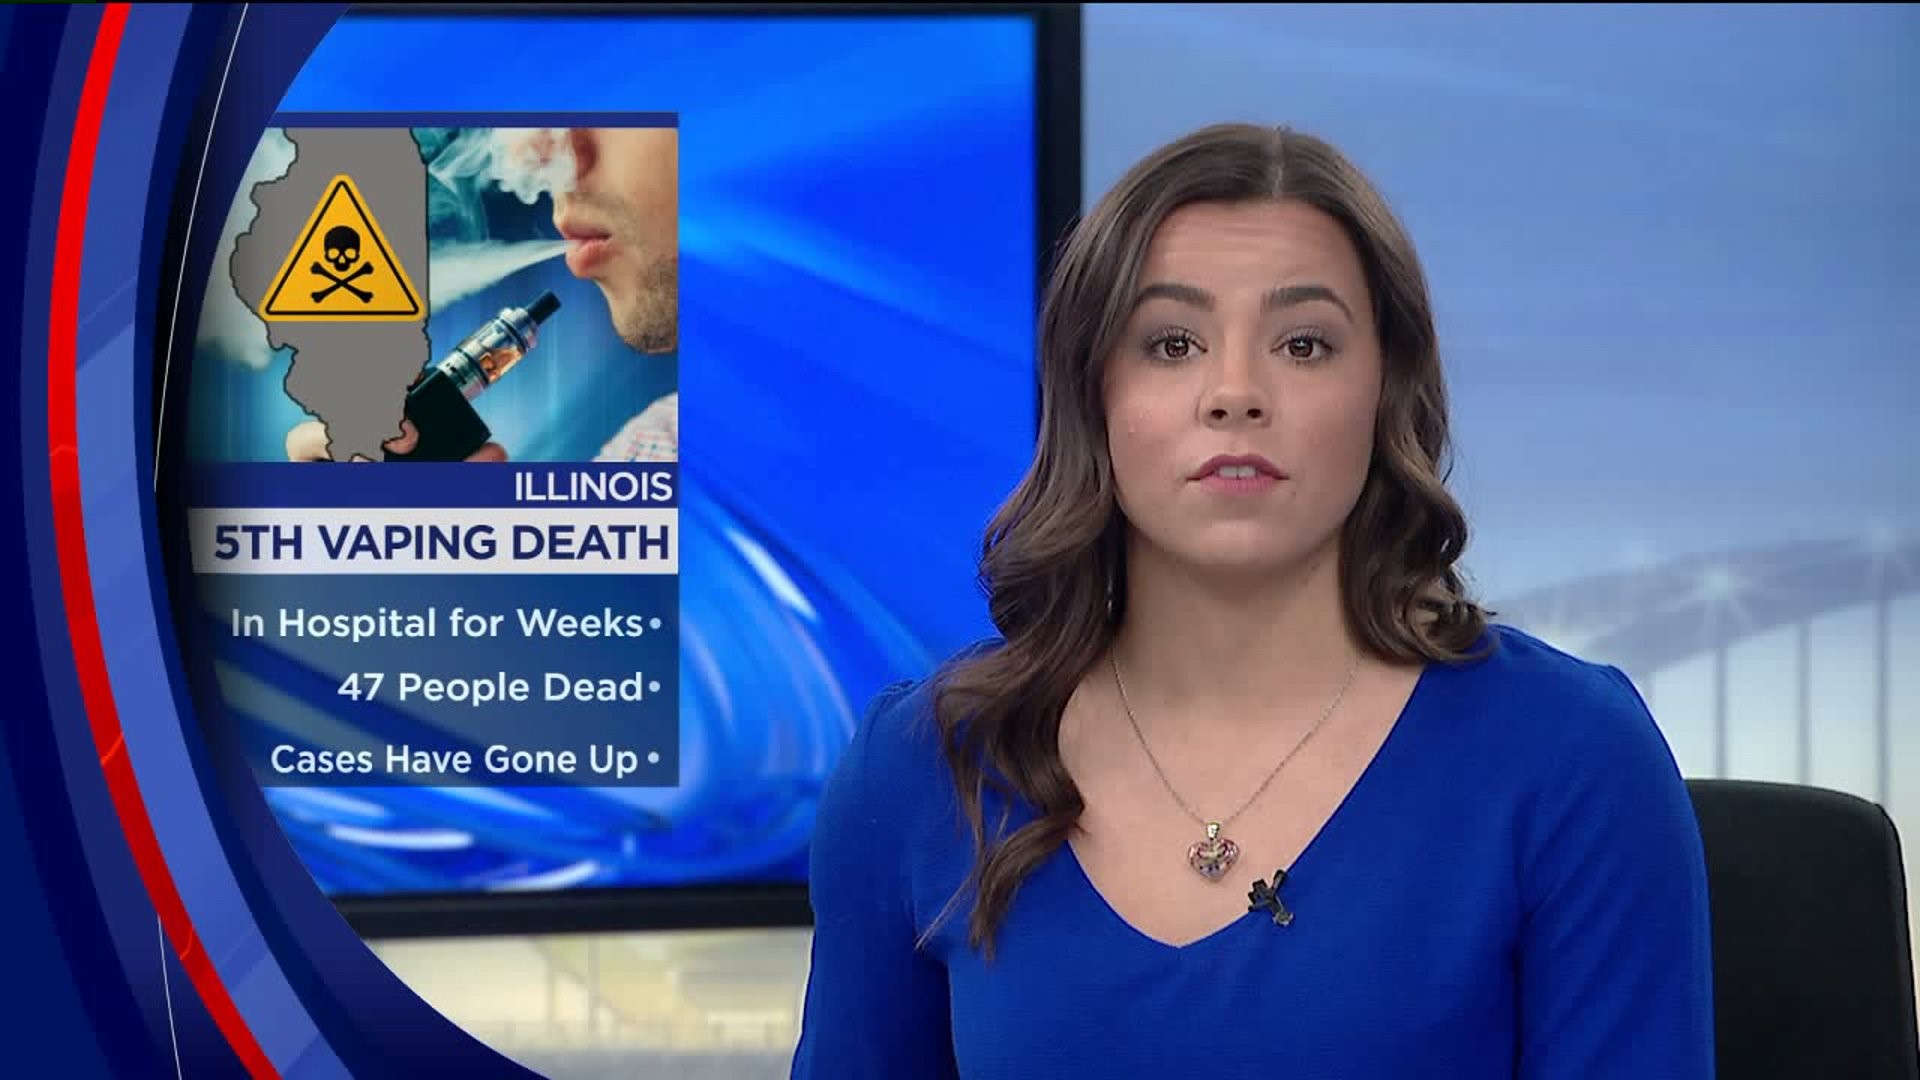 Health officials confirm 5th vaping-related death in Illinois